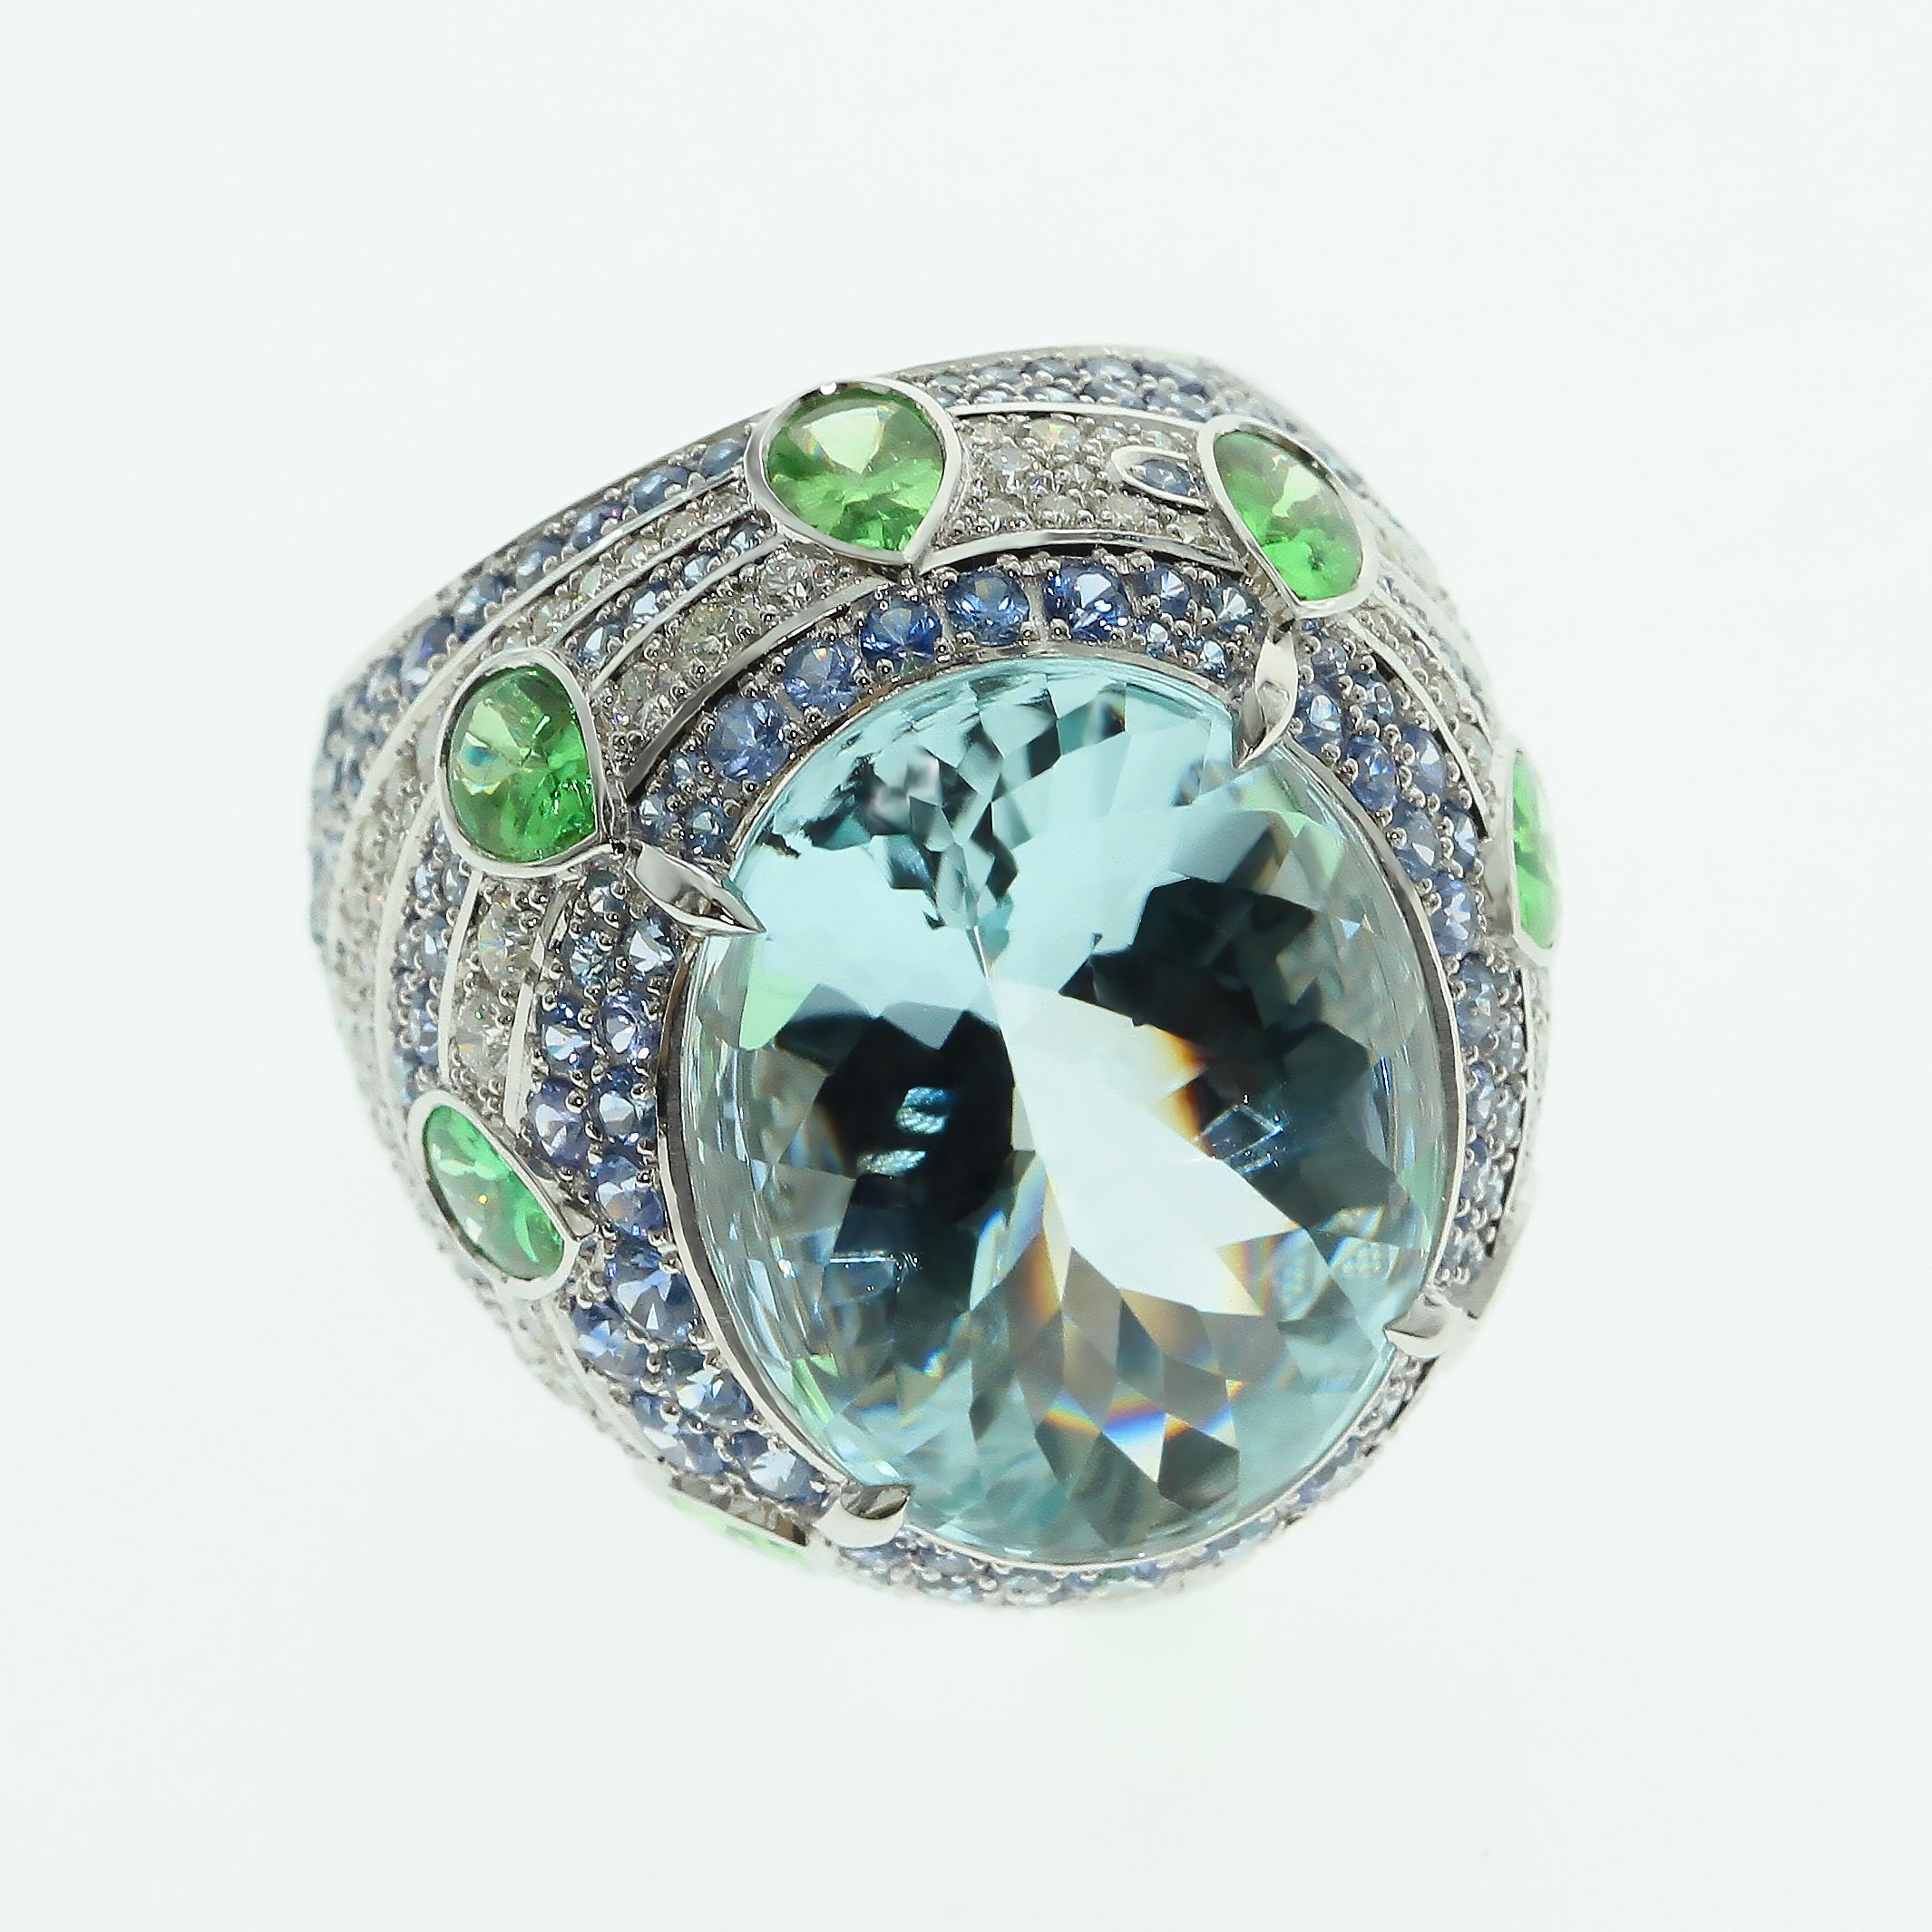 Aquamarine 15.27 carat, Tsavorite Diamonds Sapphire 18 Karat White Gold Oriental Ring 
Aquamarine have bufftop Oval cut, the crown is cabochon and pavilion is faceted 
This cut looks very vibrant with the Aquamarine, Tsavorites are supported the